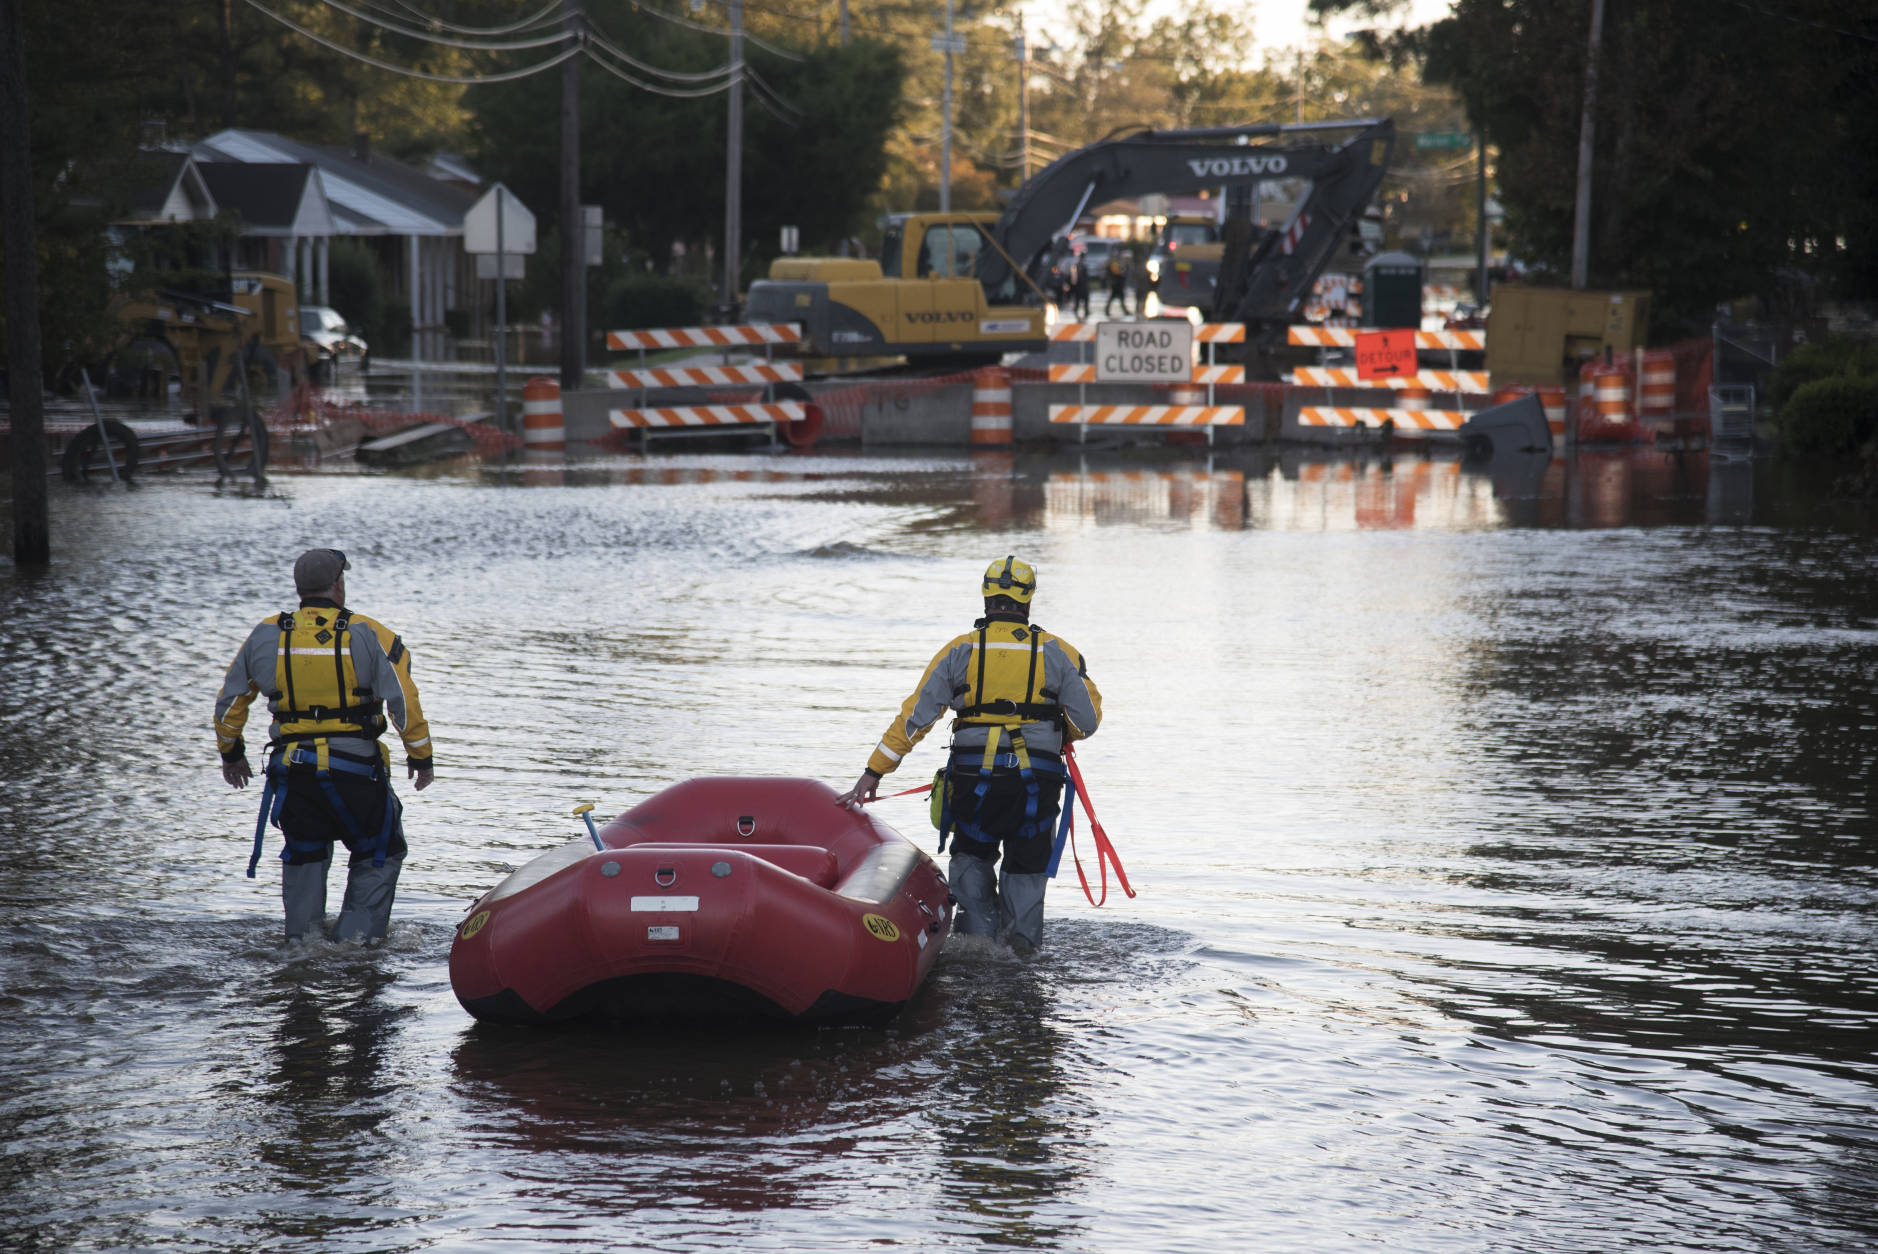 A swift water rescue team down a street covered by floodwaters caused by rain from Hurricane Matthew in Lumberton, N.C., Monday, Oct. 10, 2016. (AP Photo/Mike Spencer)